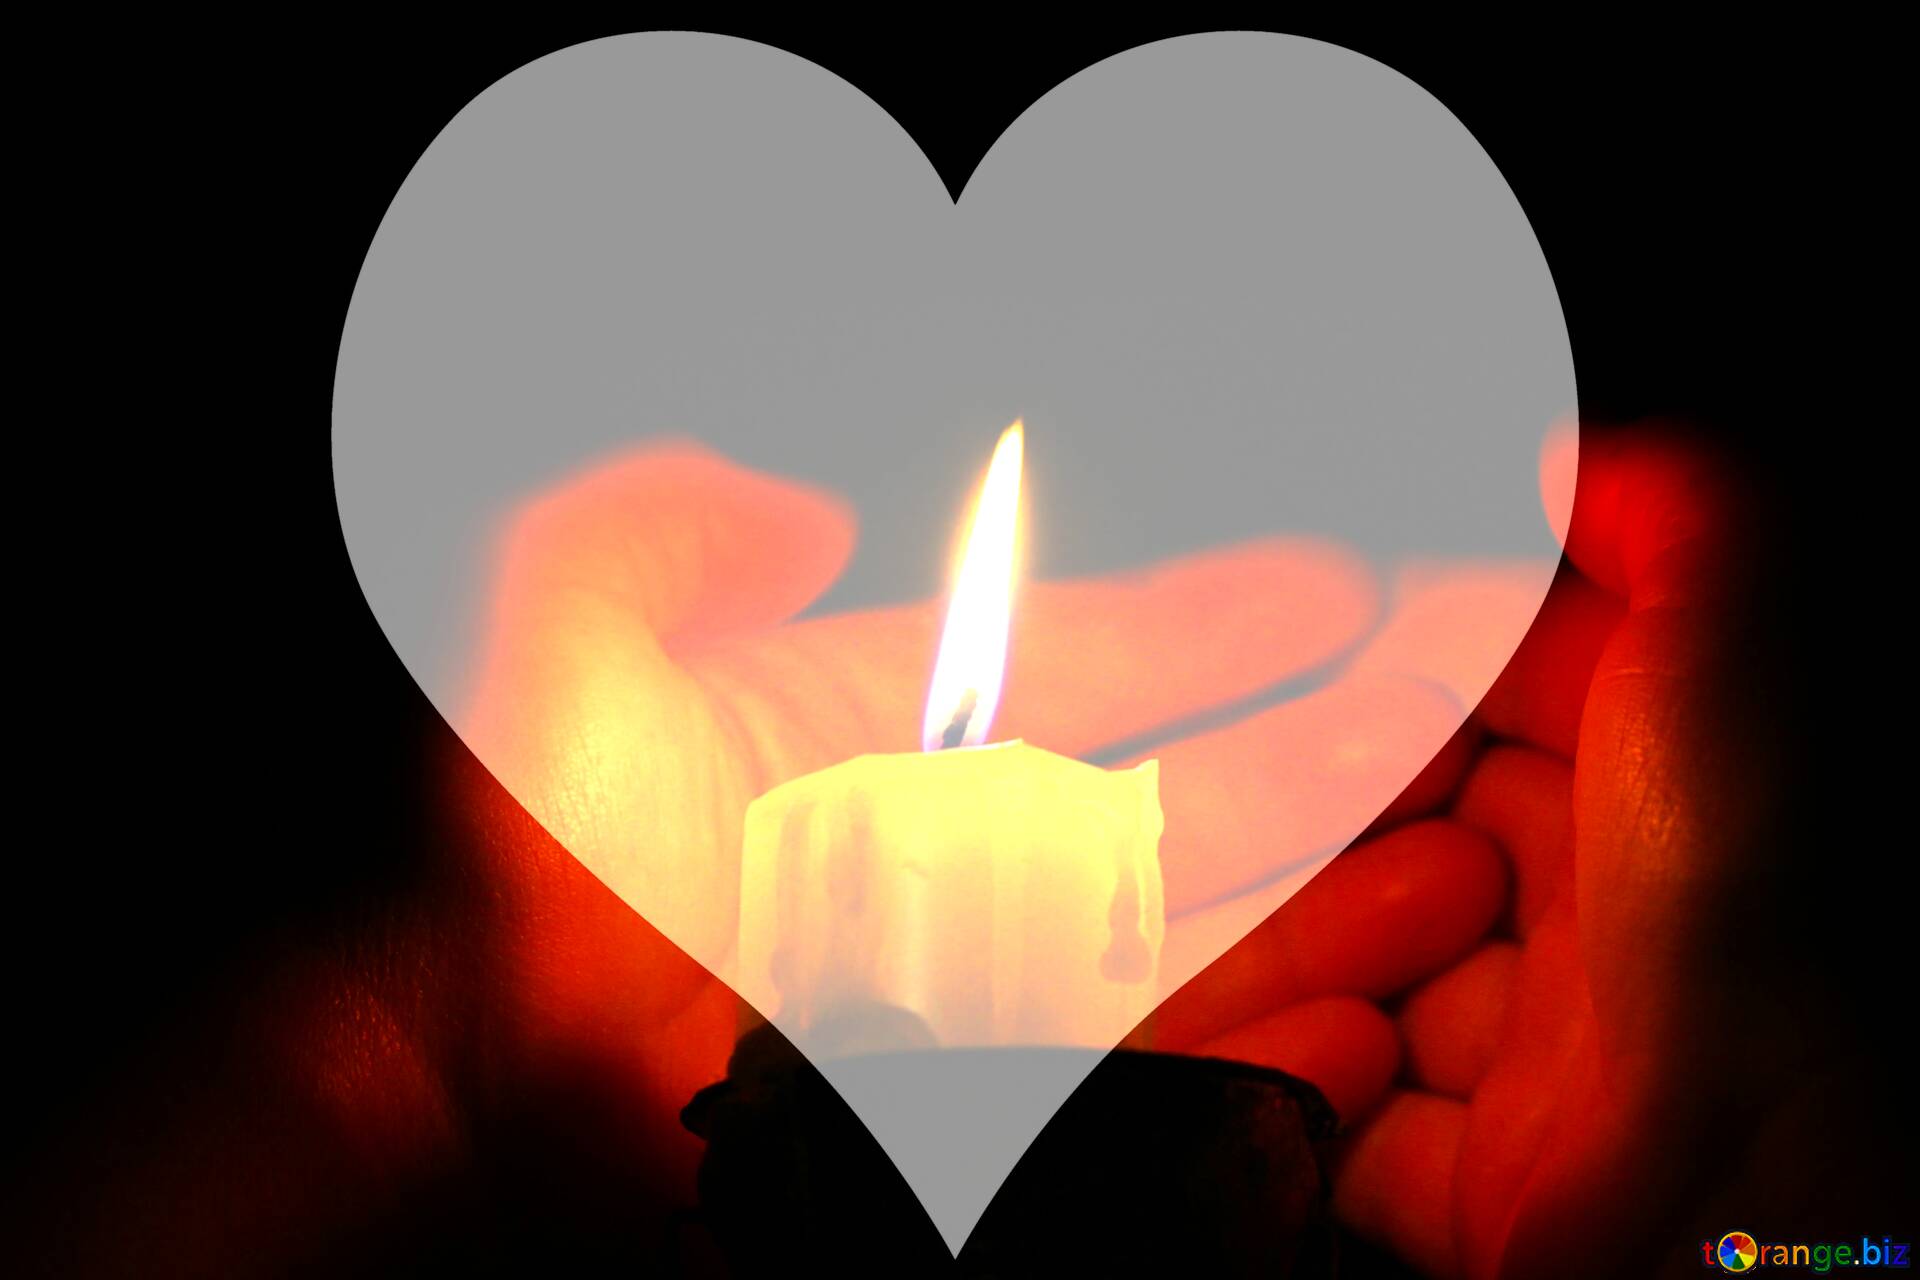 Download free picture Hands of love candle heart on CC-BY License ~ Free Image Stock tOrange.biz ~ fx №106844